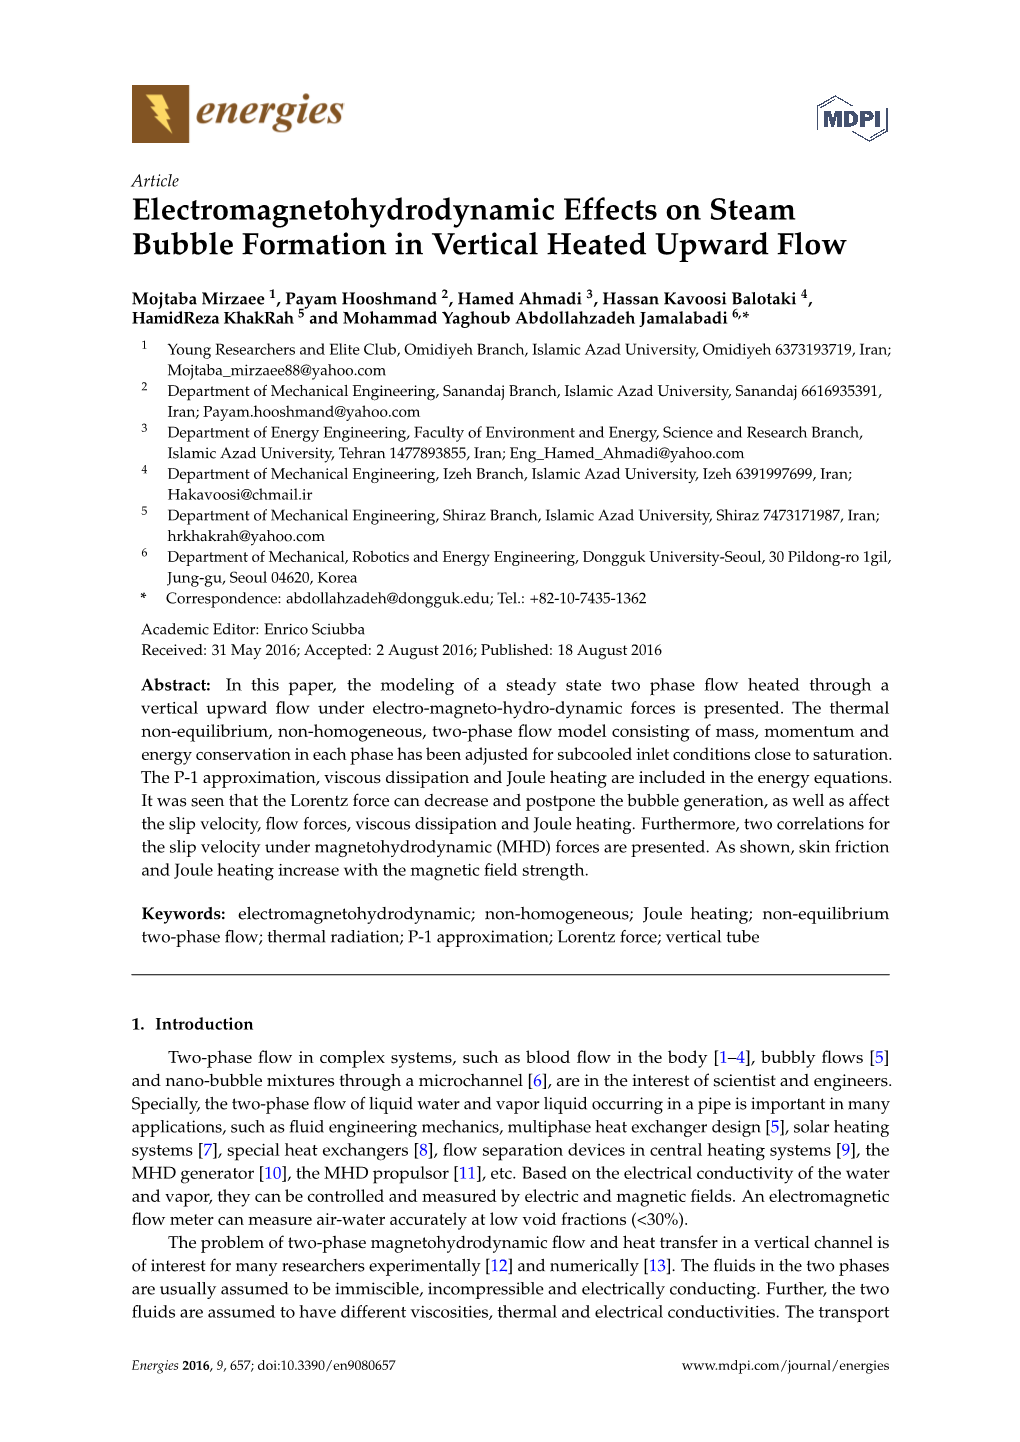 Electromagnetohydrodynamic Effects on Steam Bubble Formation in Vertical Heated Upward Flow